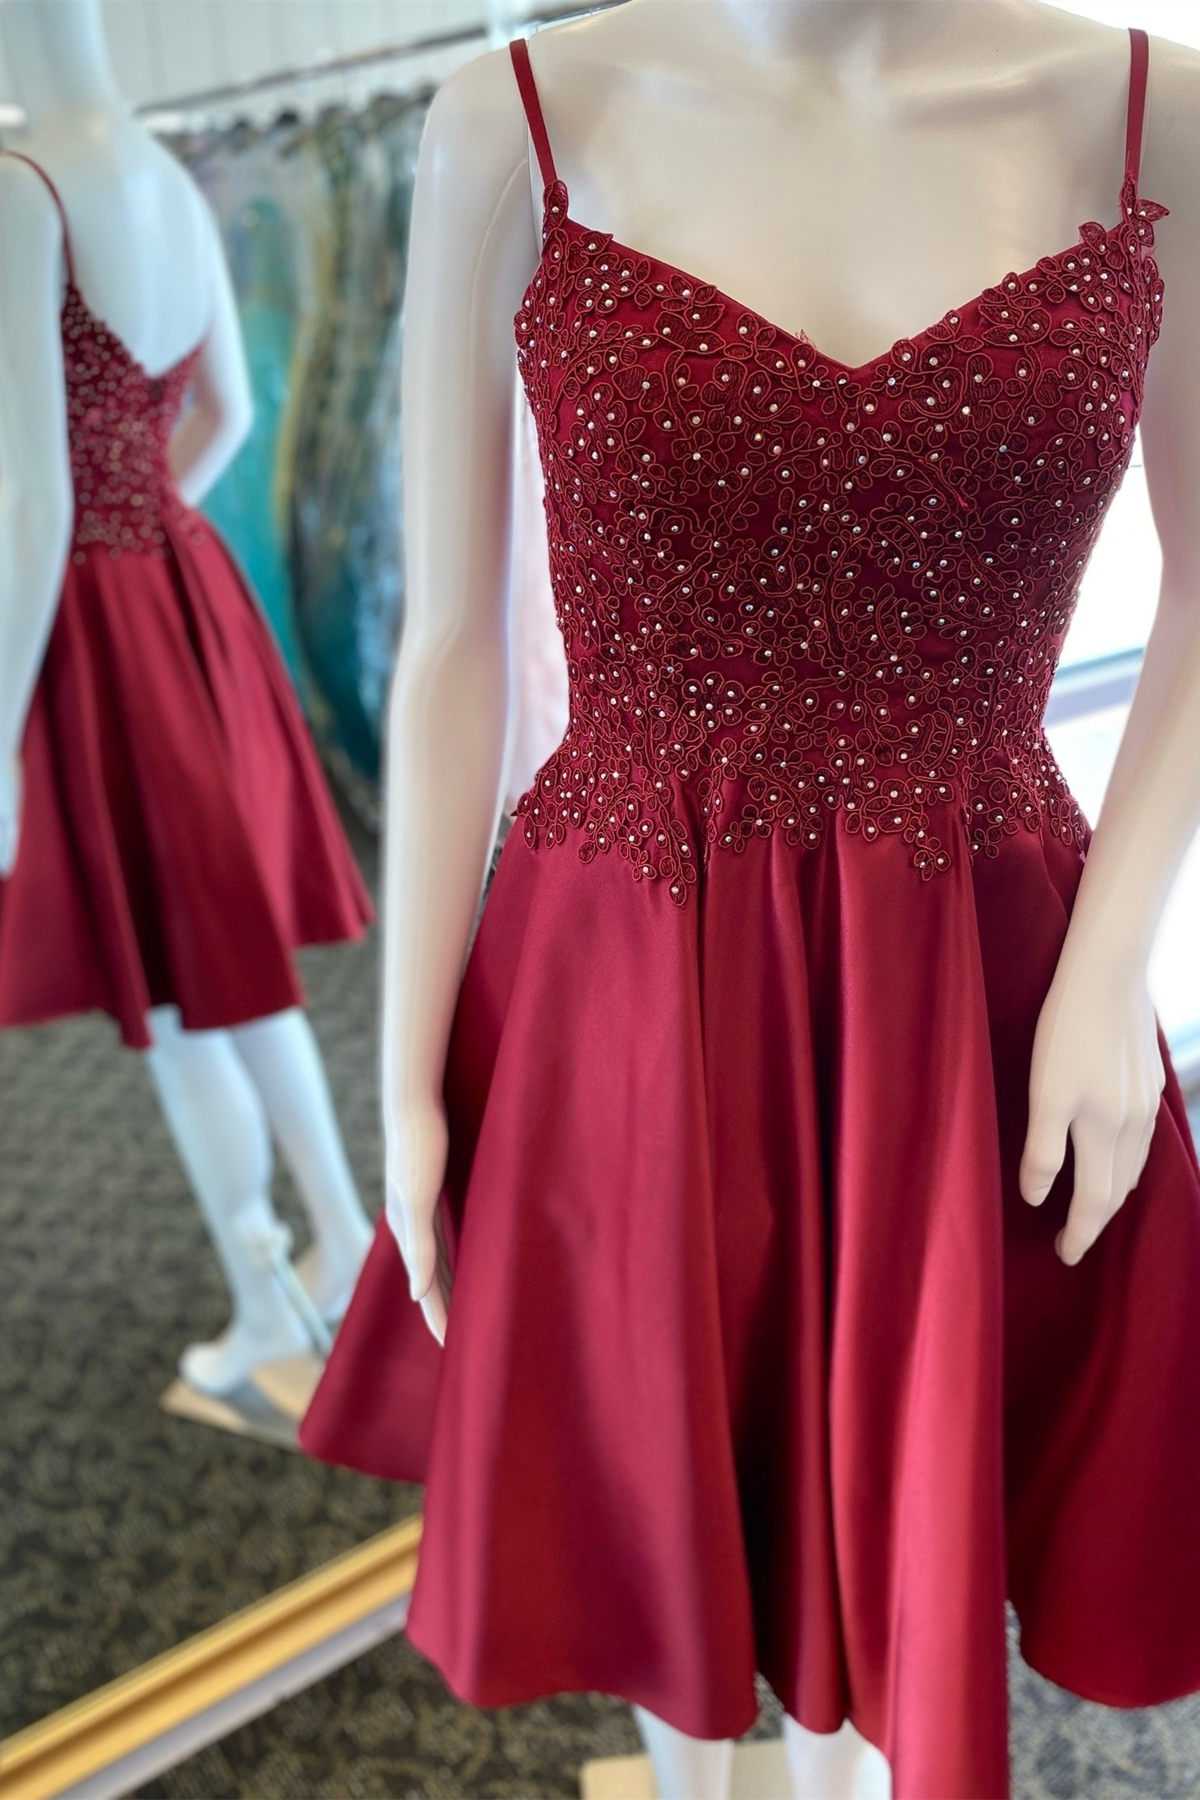 Prom Dresses Brown, A-Line Wine Red Beaded V-Neck Homecoming Dress